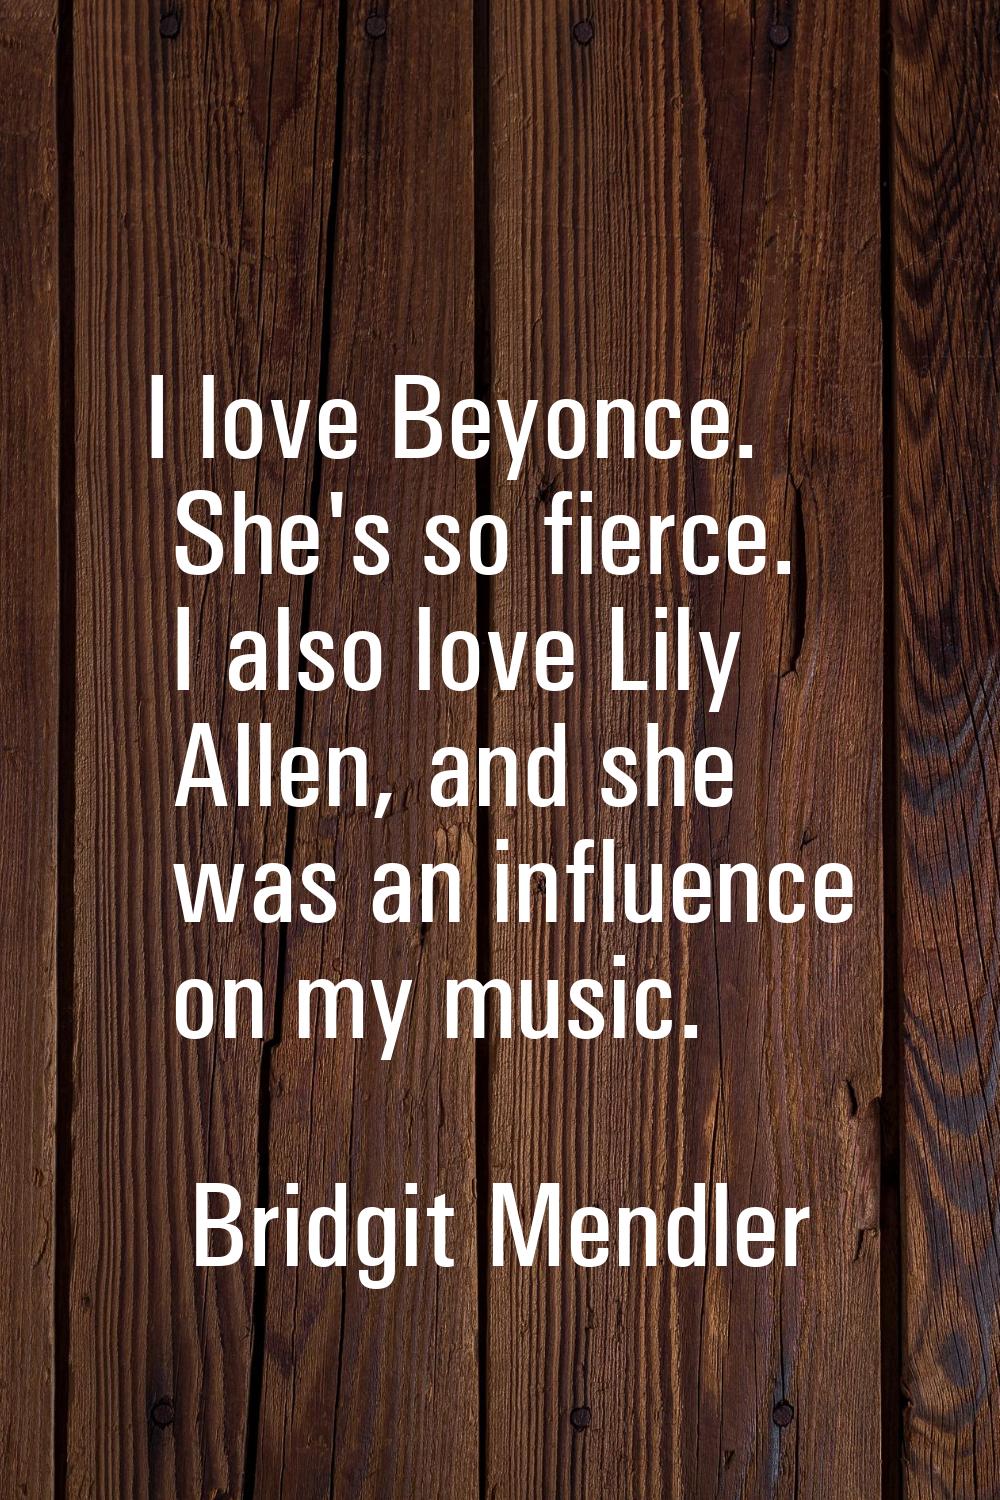 I love Beyonce. She's so fierce. I also love Lily Allen, and she was an influence on my music.